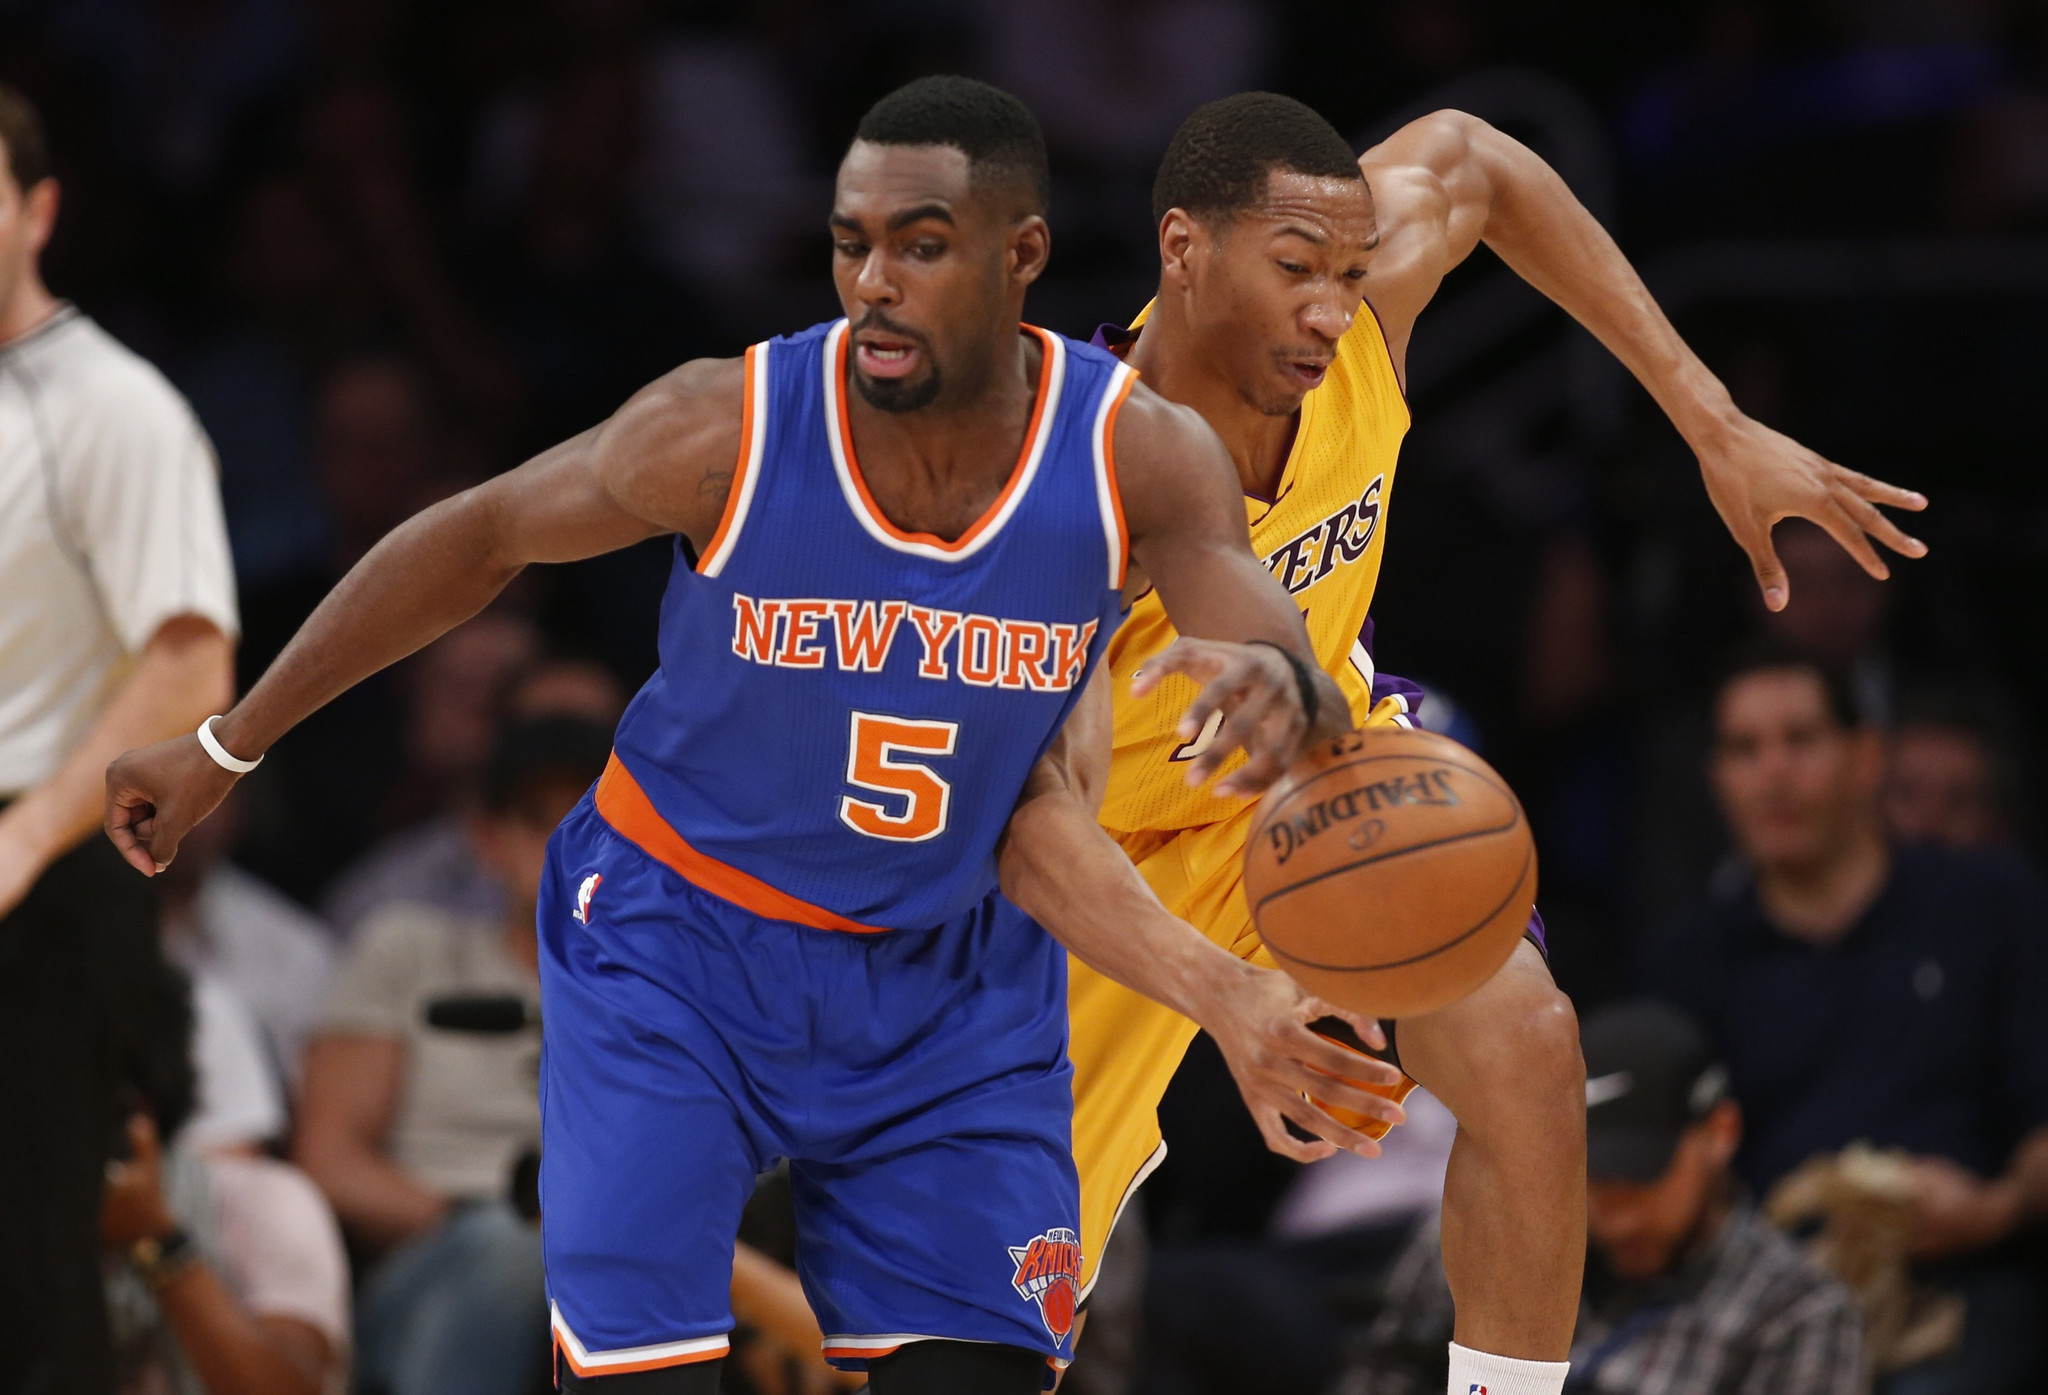 Lakers' late rally falls short in 101-94 loss to the Knicks - LA Times2048 x 1395